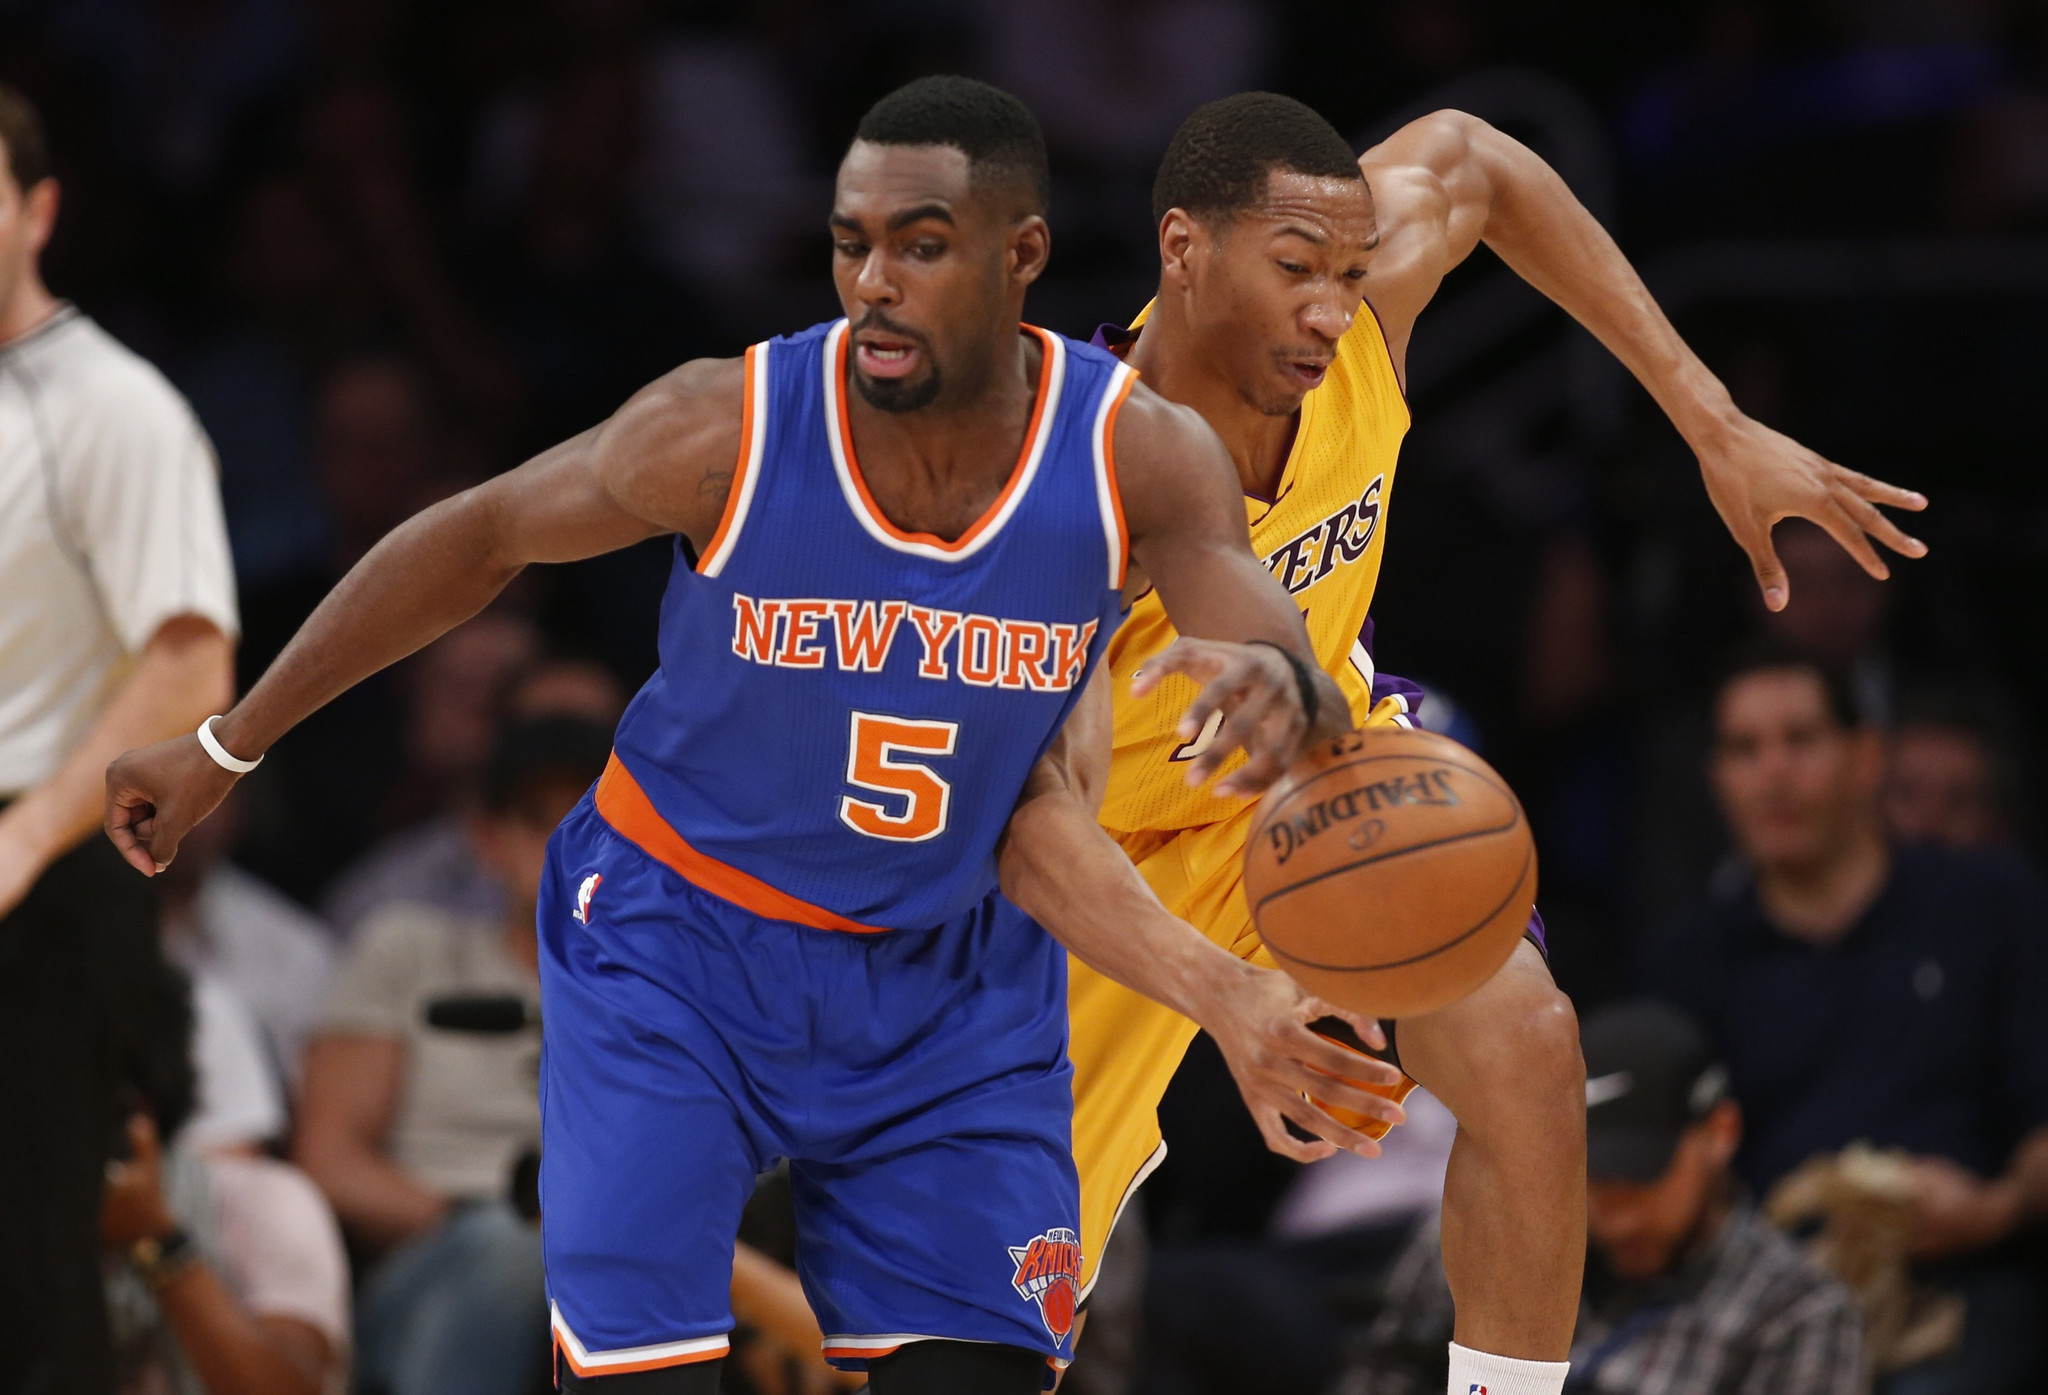 Lakers' late rally falls short in 101-94 loss to the Knicks - LA Times2048 x 1395